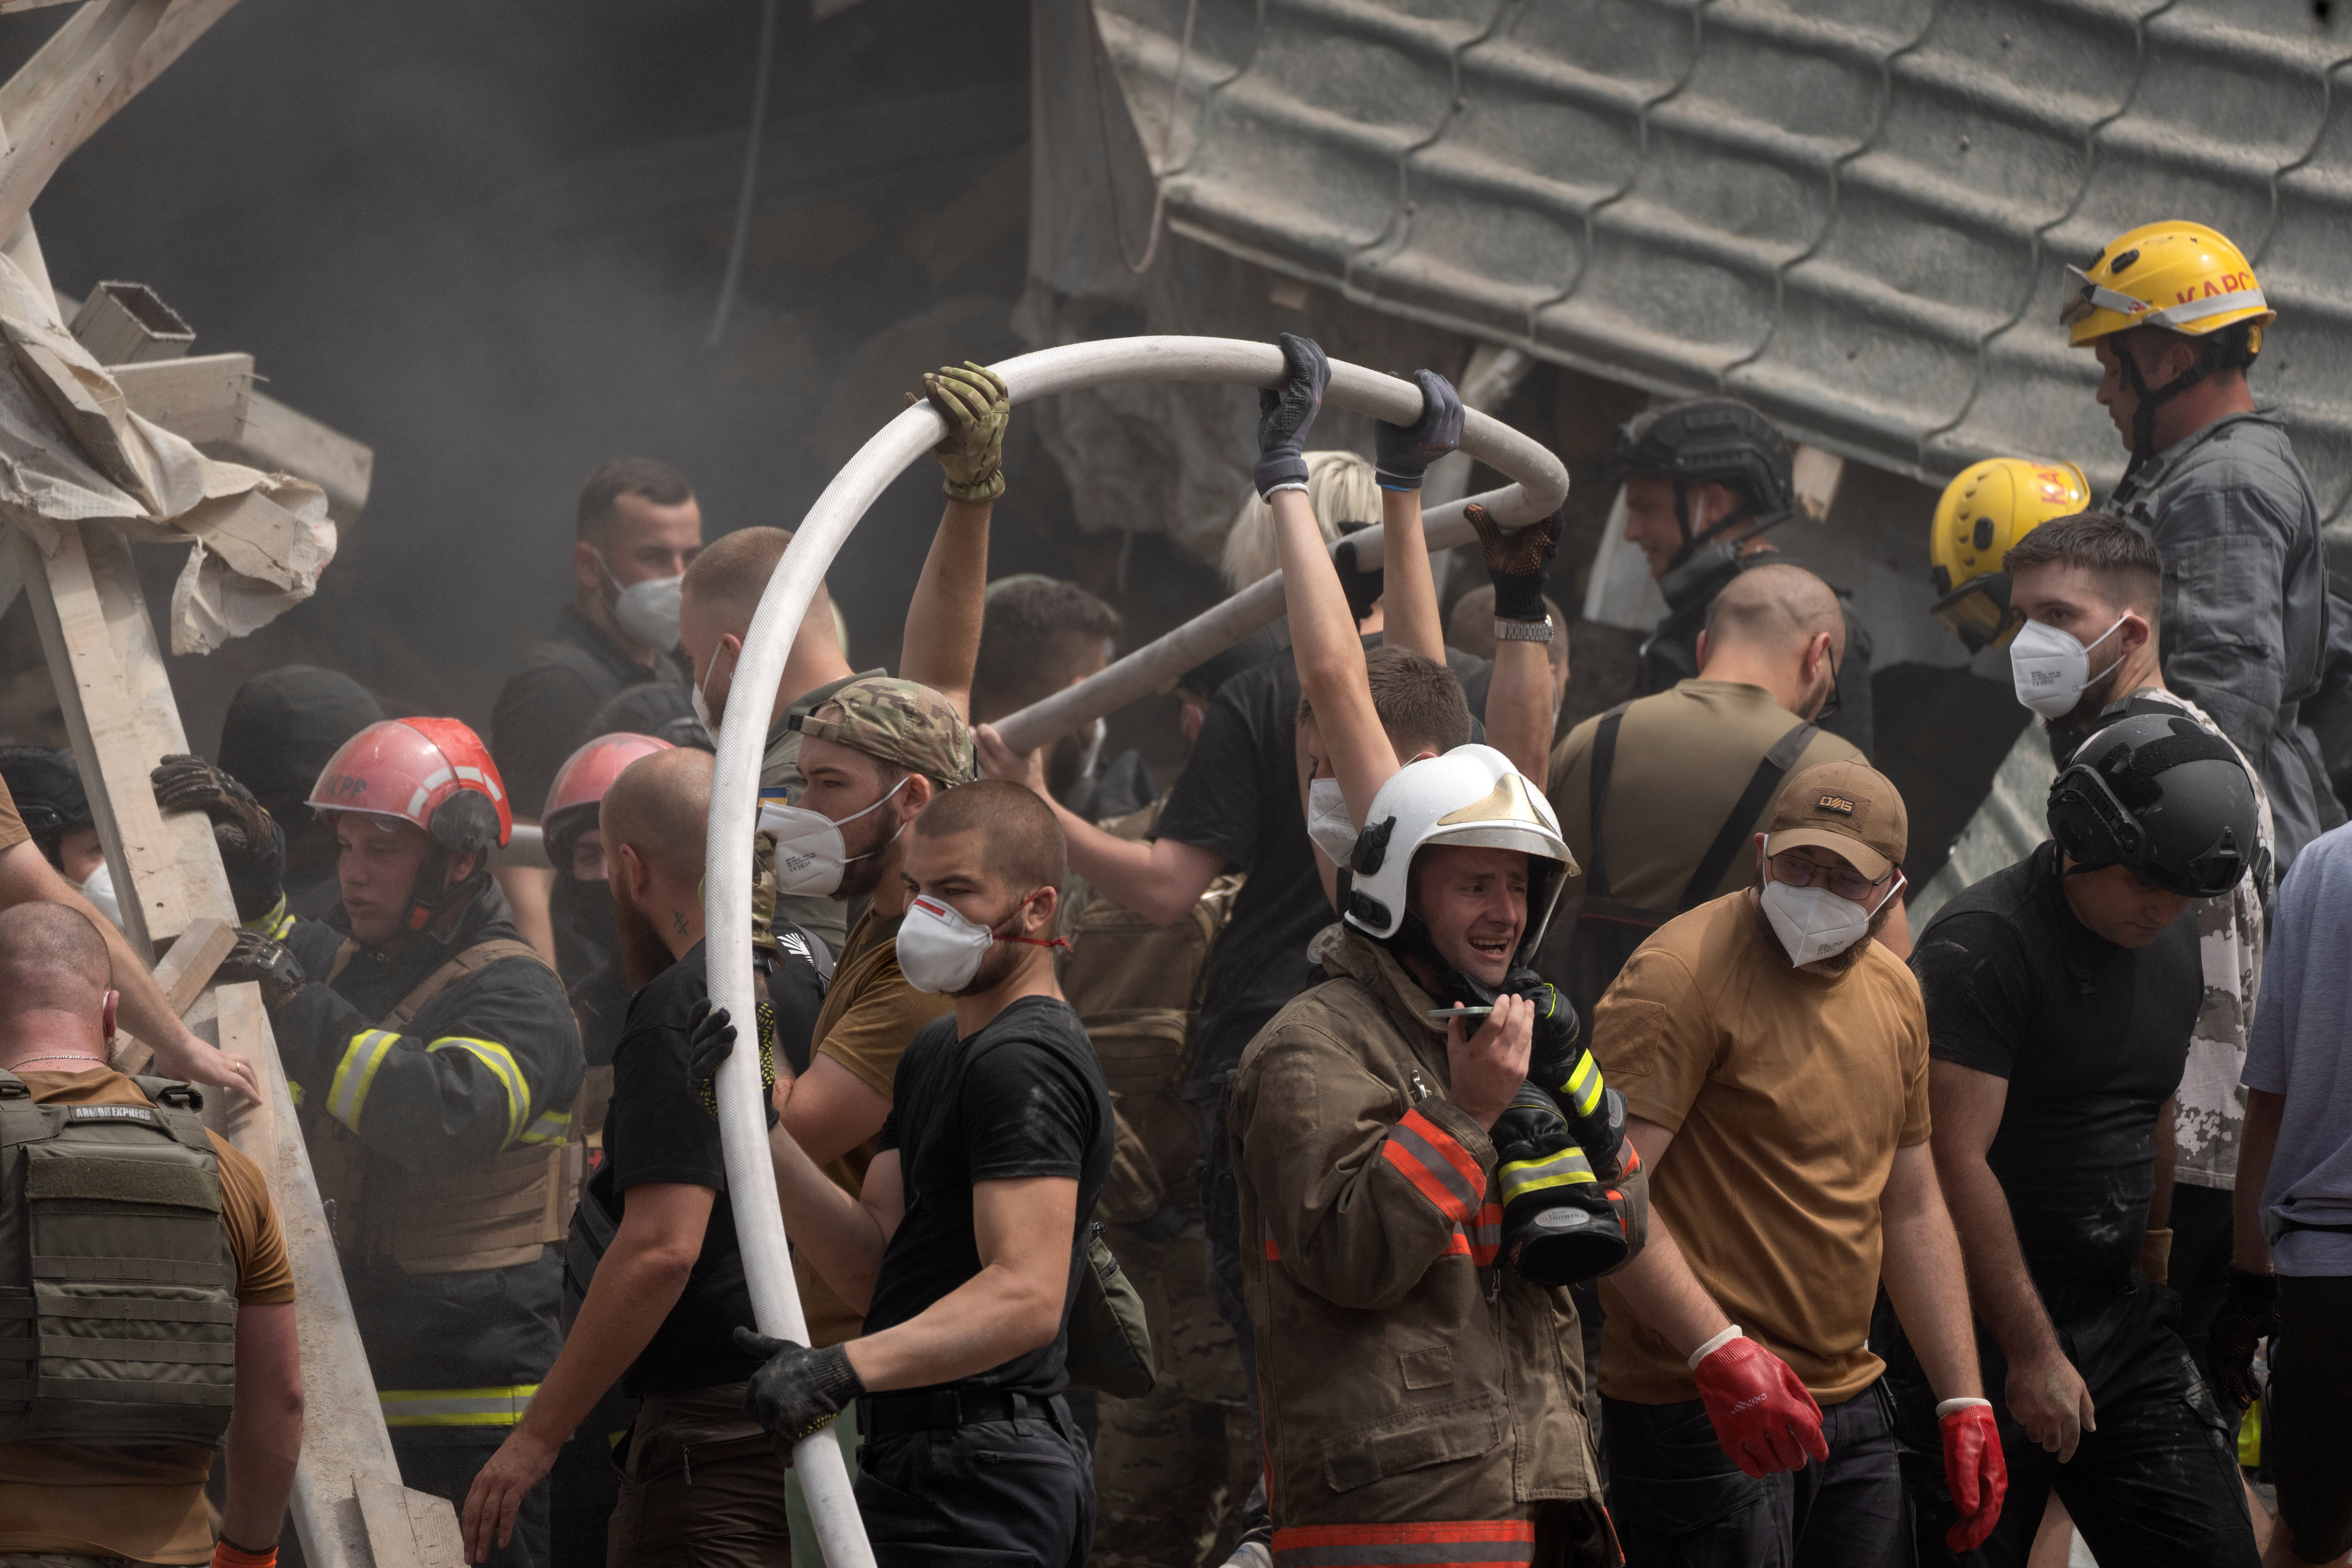 Rescue workers, volunteers and medical staff clear debris and search for victims after a Russian missile hit the country's largest children's hospital, Okhmadit, in Kyiv, Ukraine.